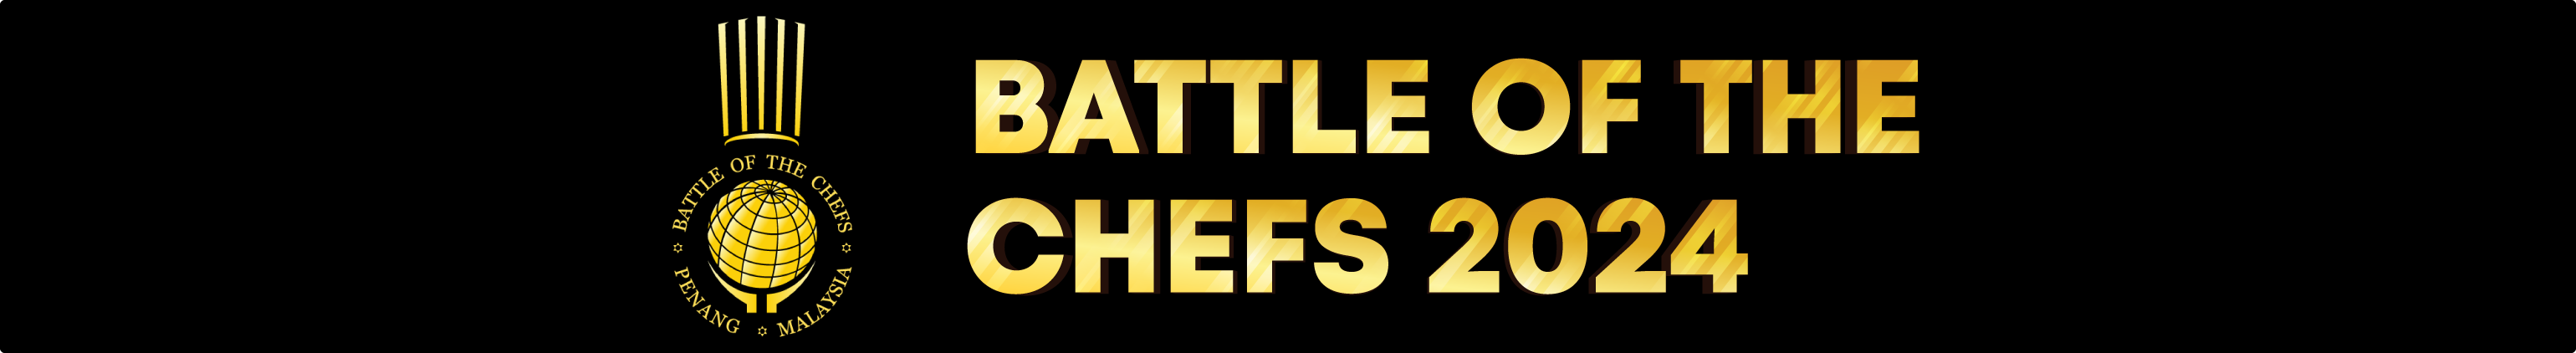 Battle of The Chefs